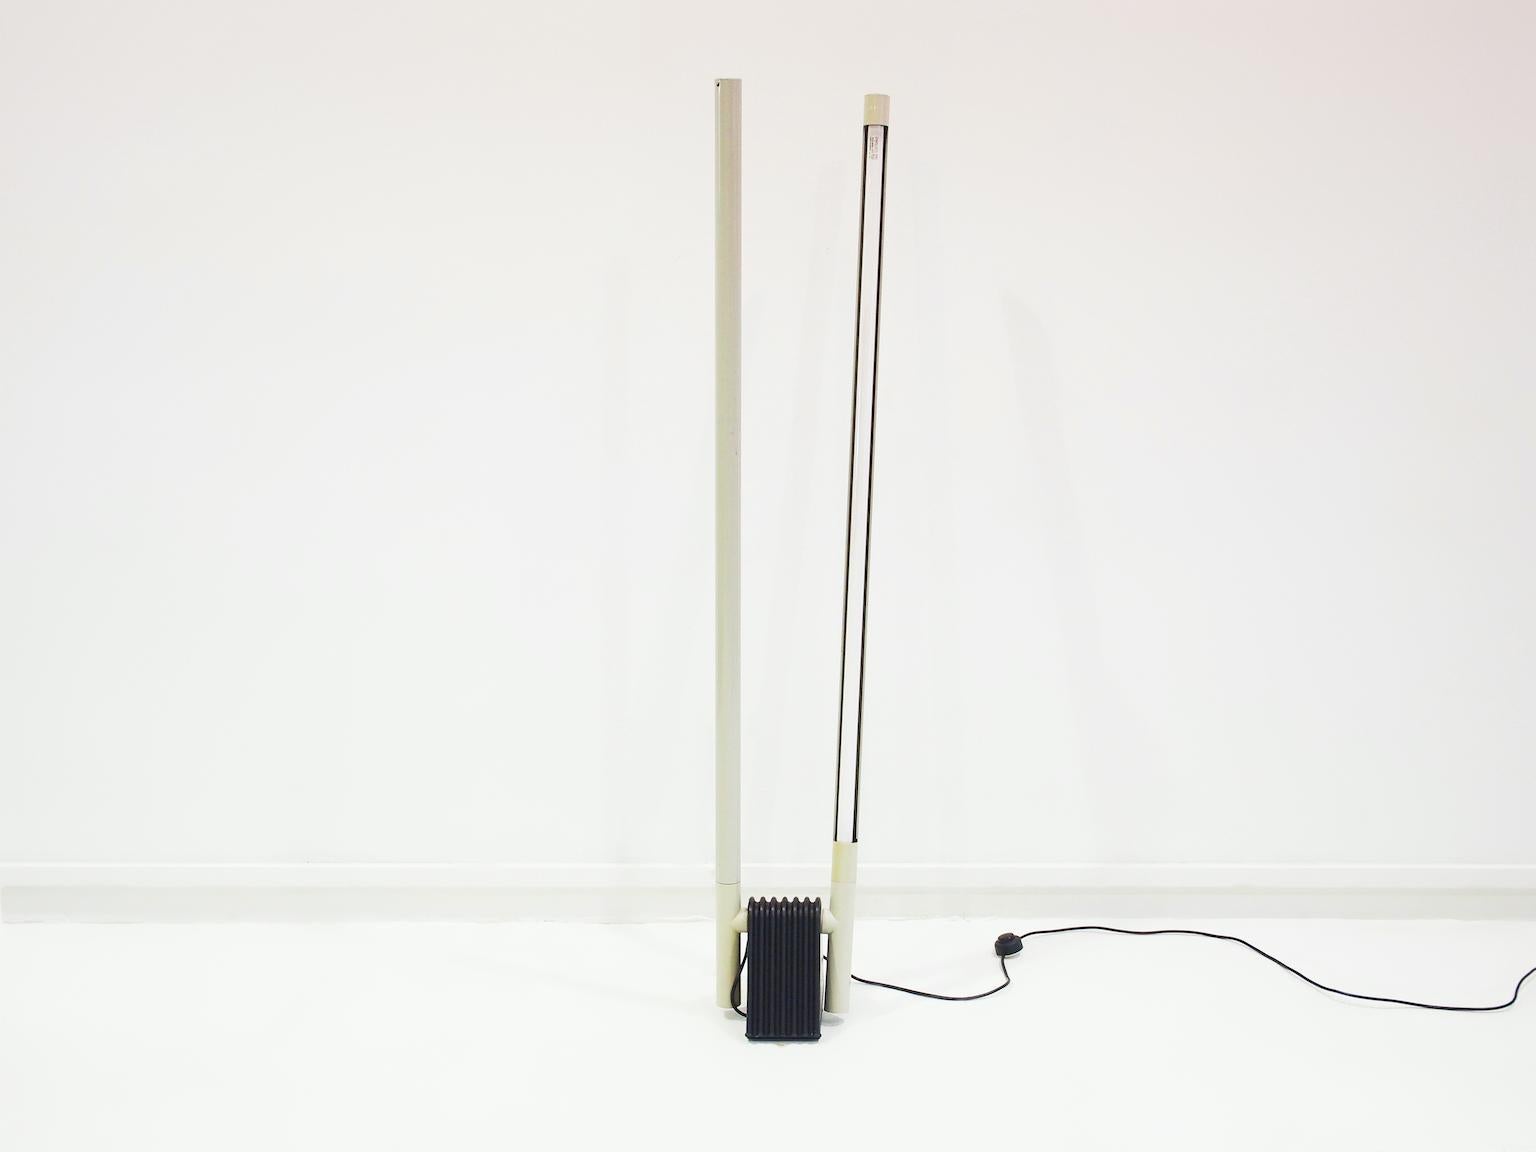 Floor lamp from the Sistema Flu series, white painted metal structure and black plastic base. Designed by Rodolfo Bonetto, produced by Luci, Italy.